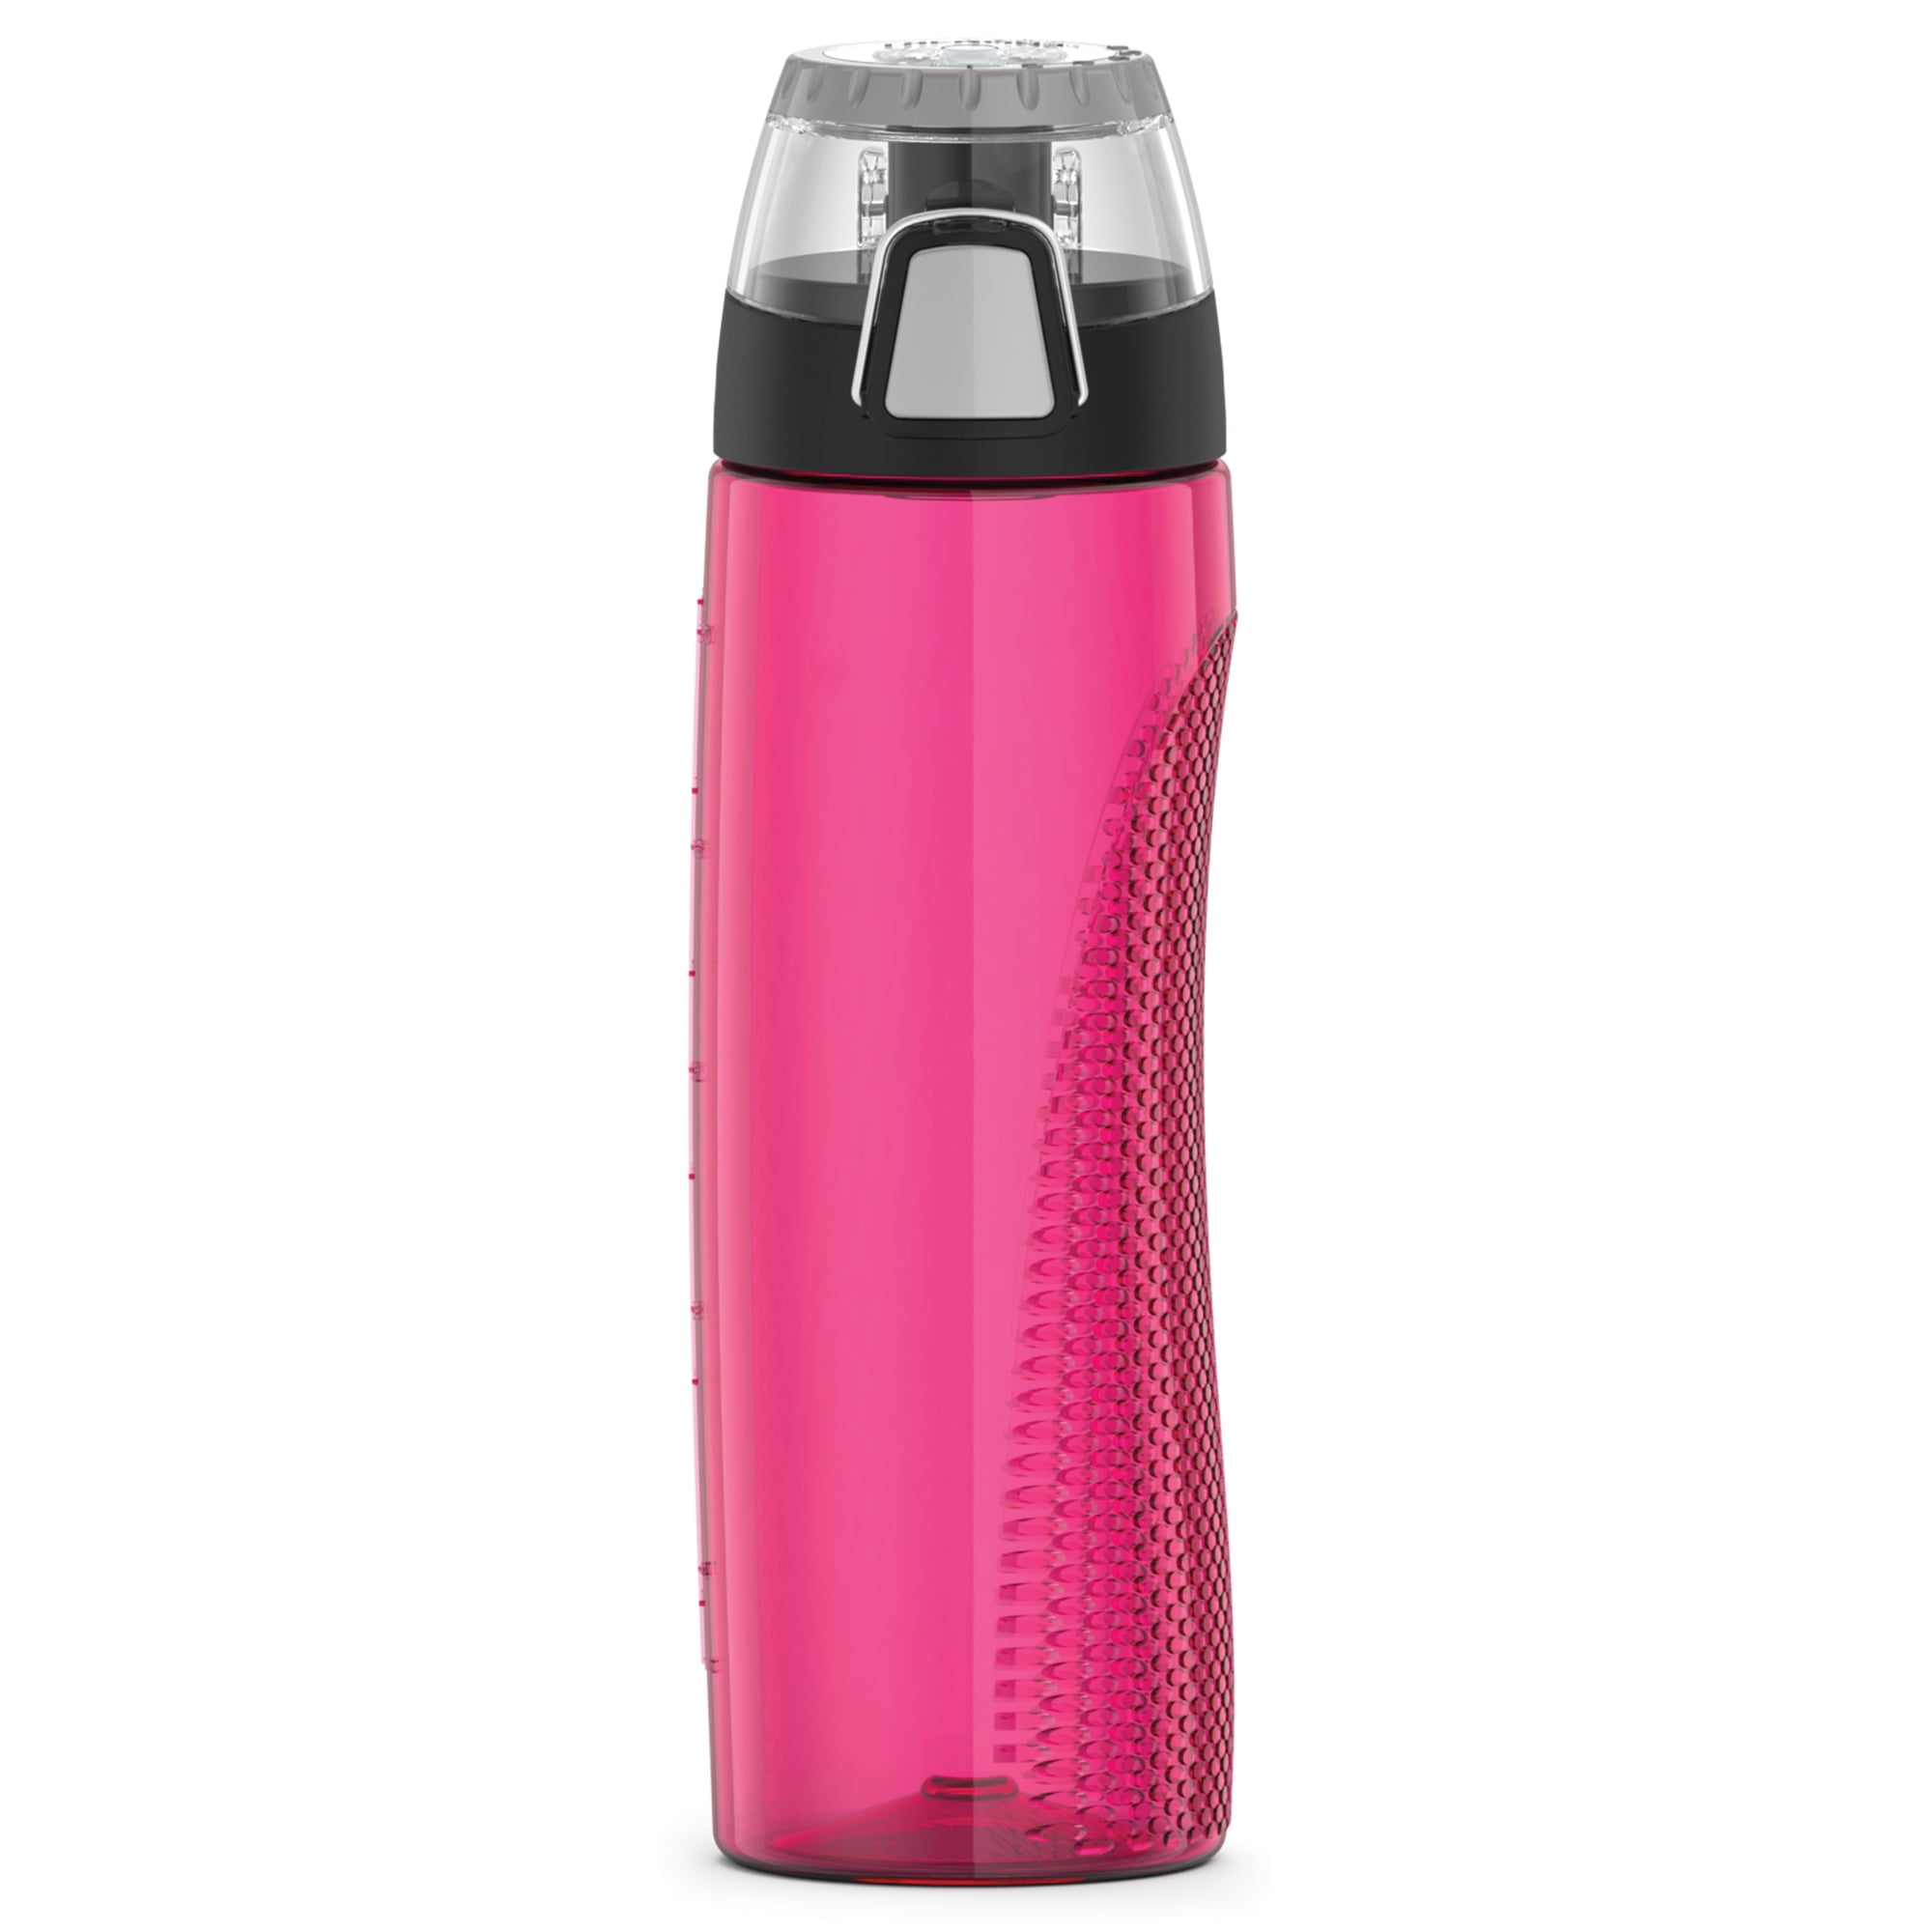  Thermos 64 Ounce Foam Insulated Hydration Bottle, Pink,  FPG1901PK4 : Sports & Outdoors